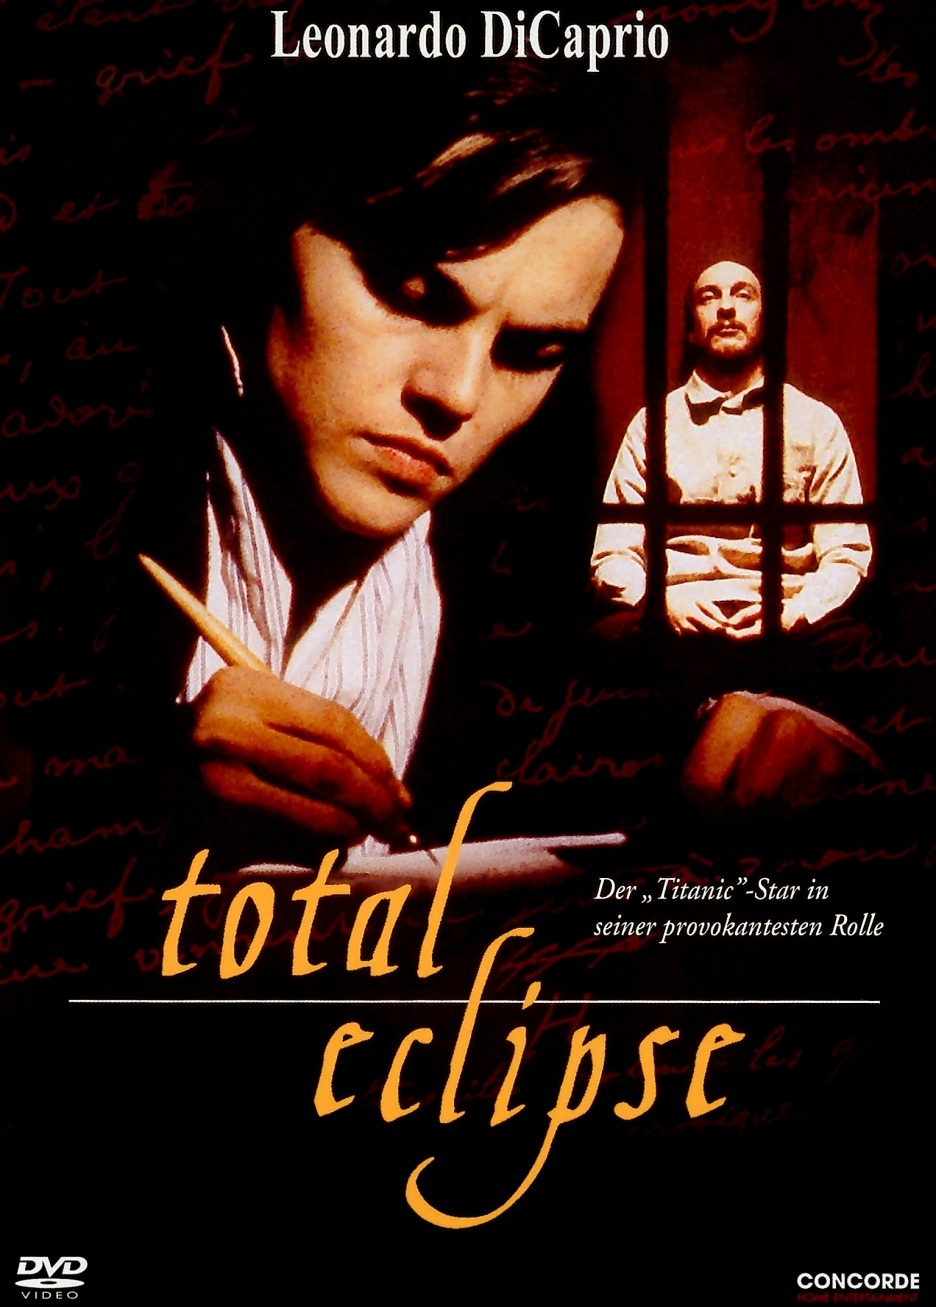 full-total-eclipse-poster-movie-800330922